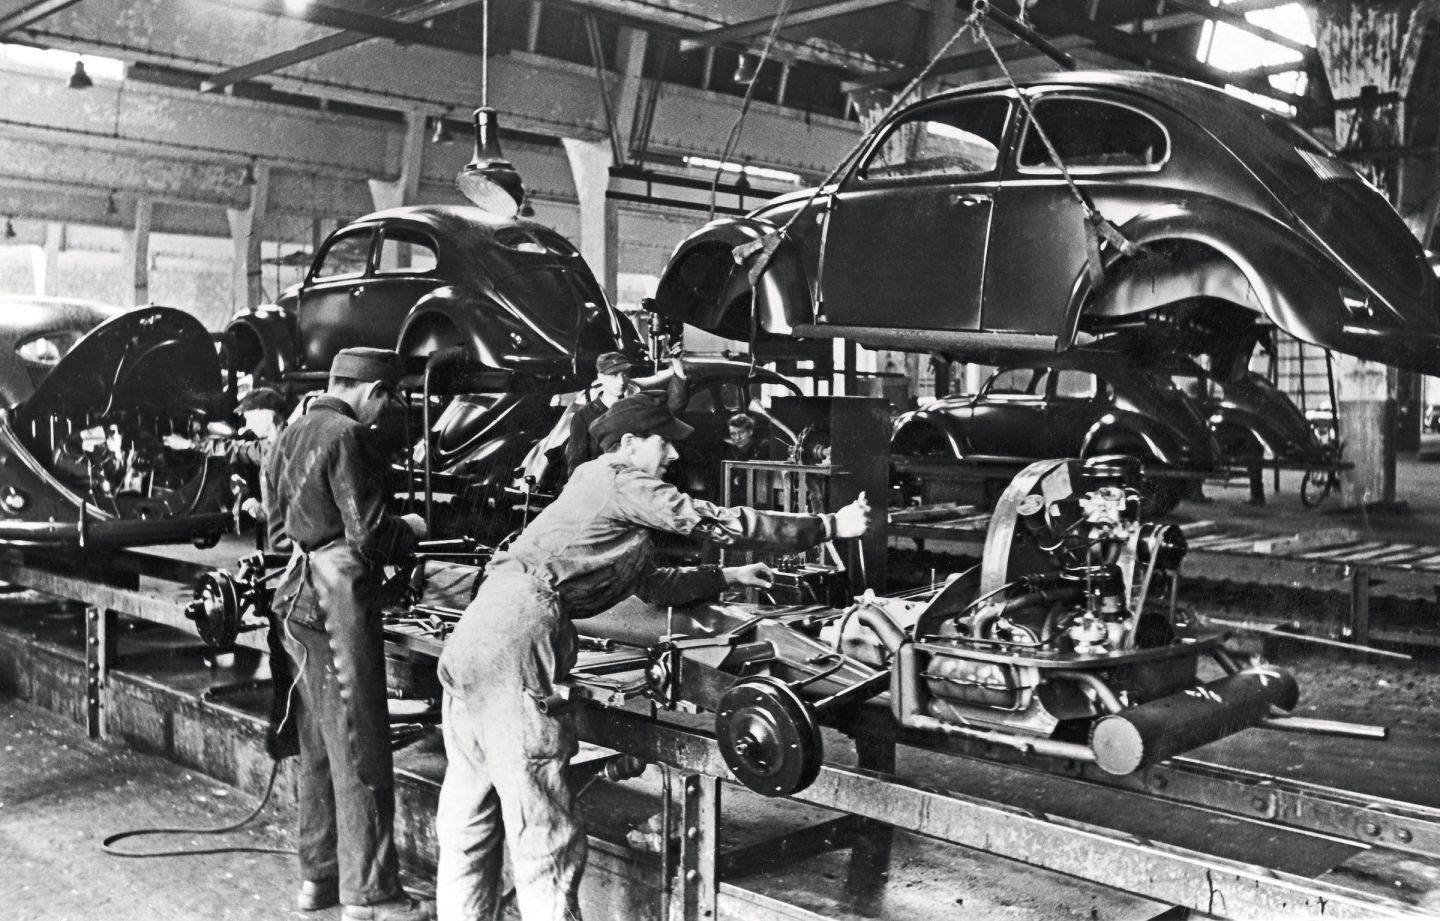 The Volkswagen assembly line was based on Ford's Detroit plant